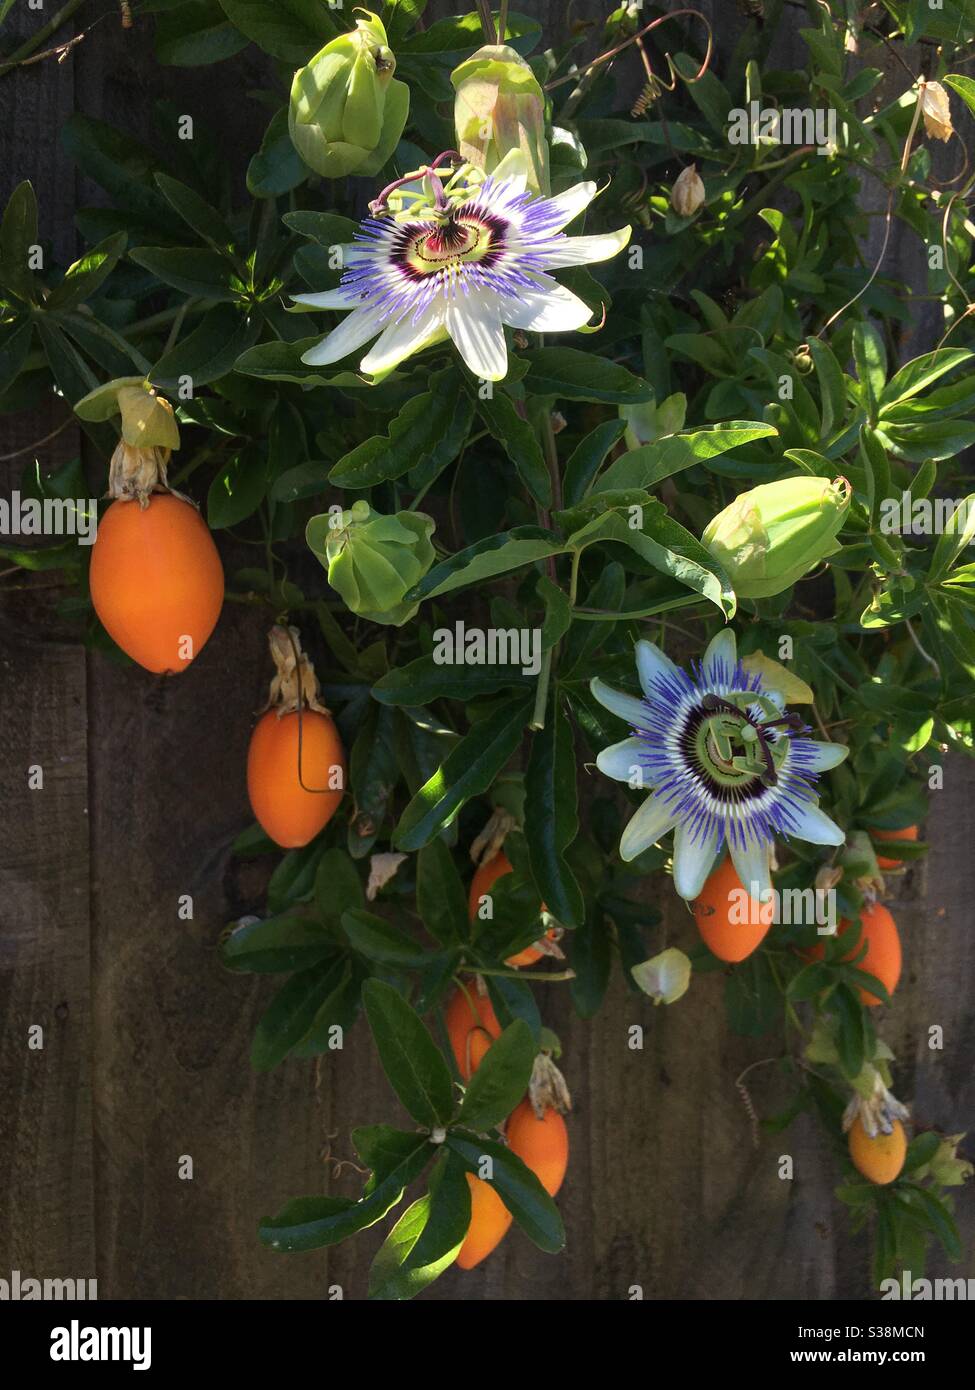 Passion flower and passion fruit hanging from vine Stock Photo